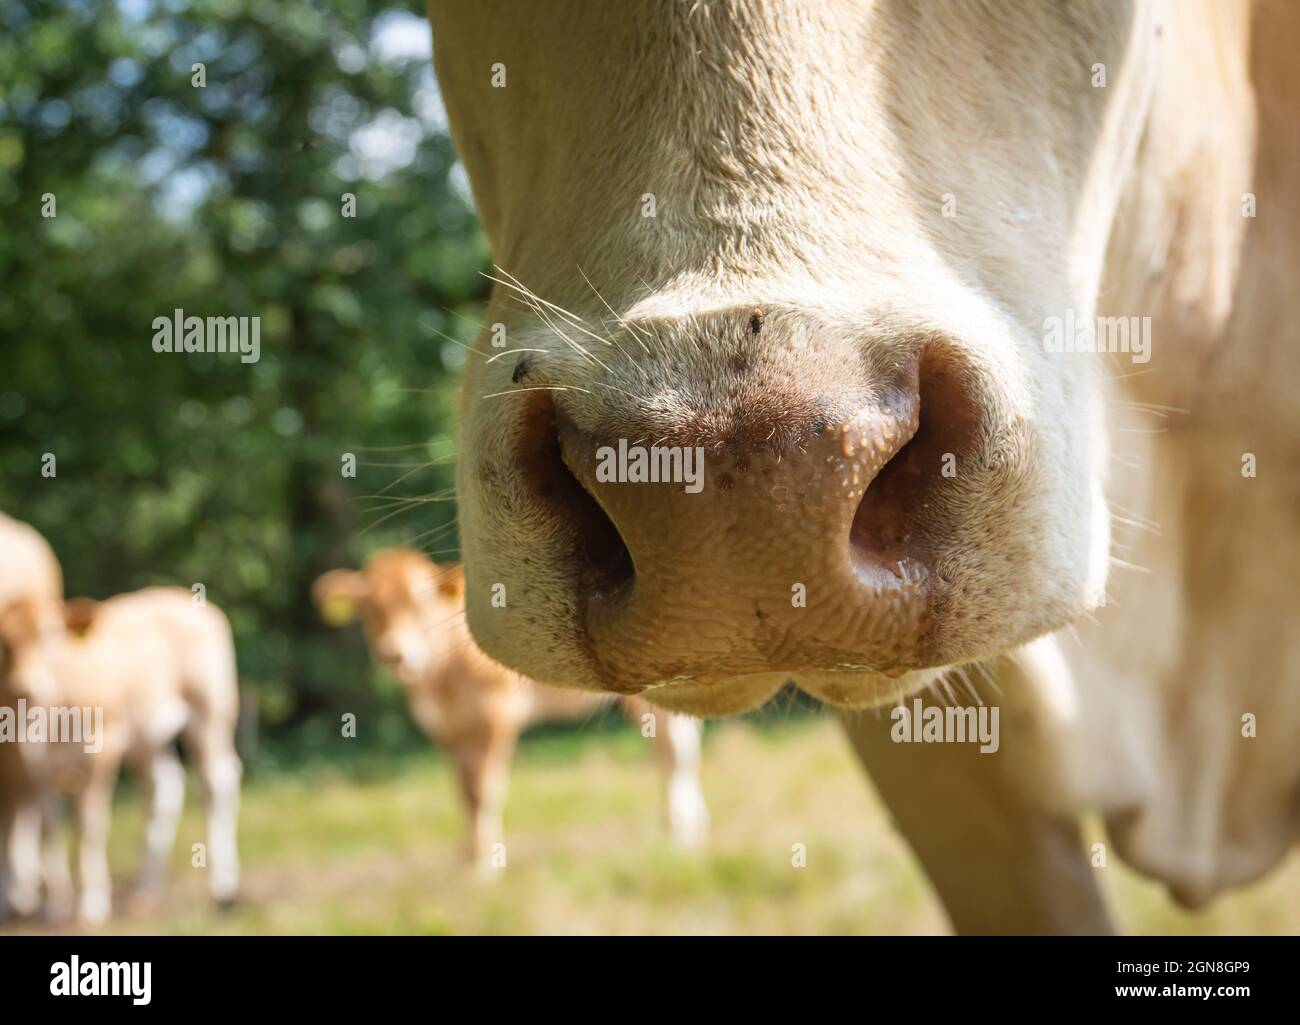 Cow nose close up on a blurred background Stock Photo